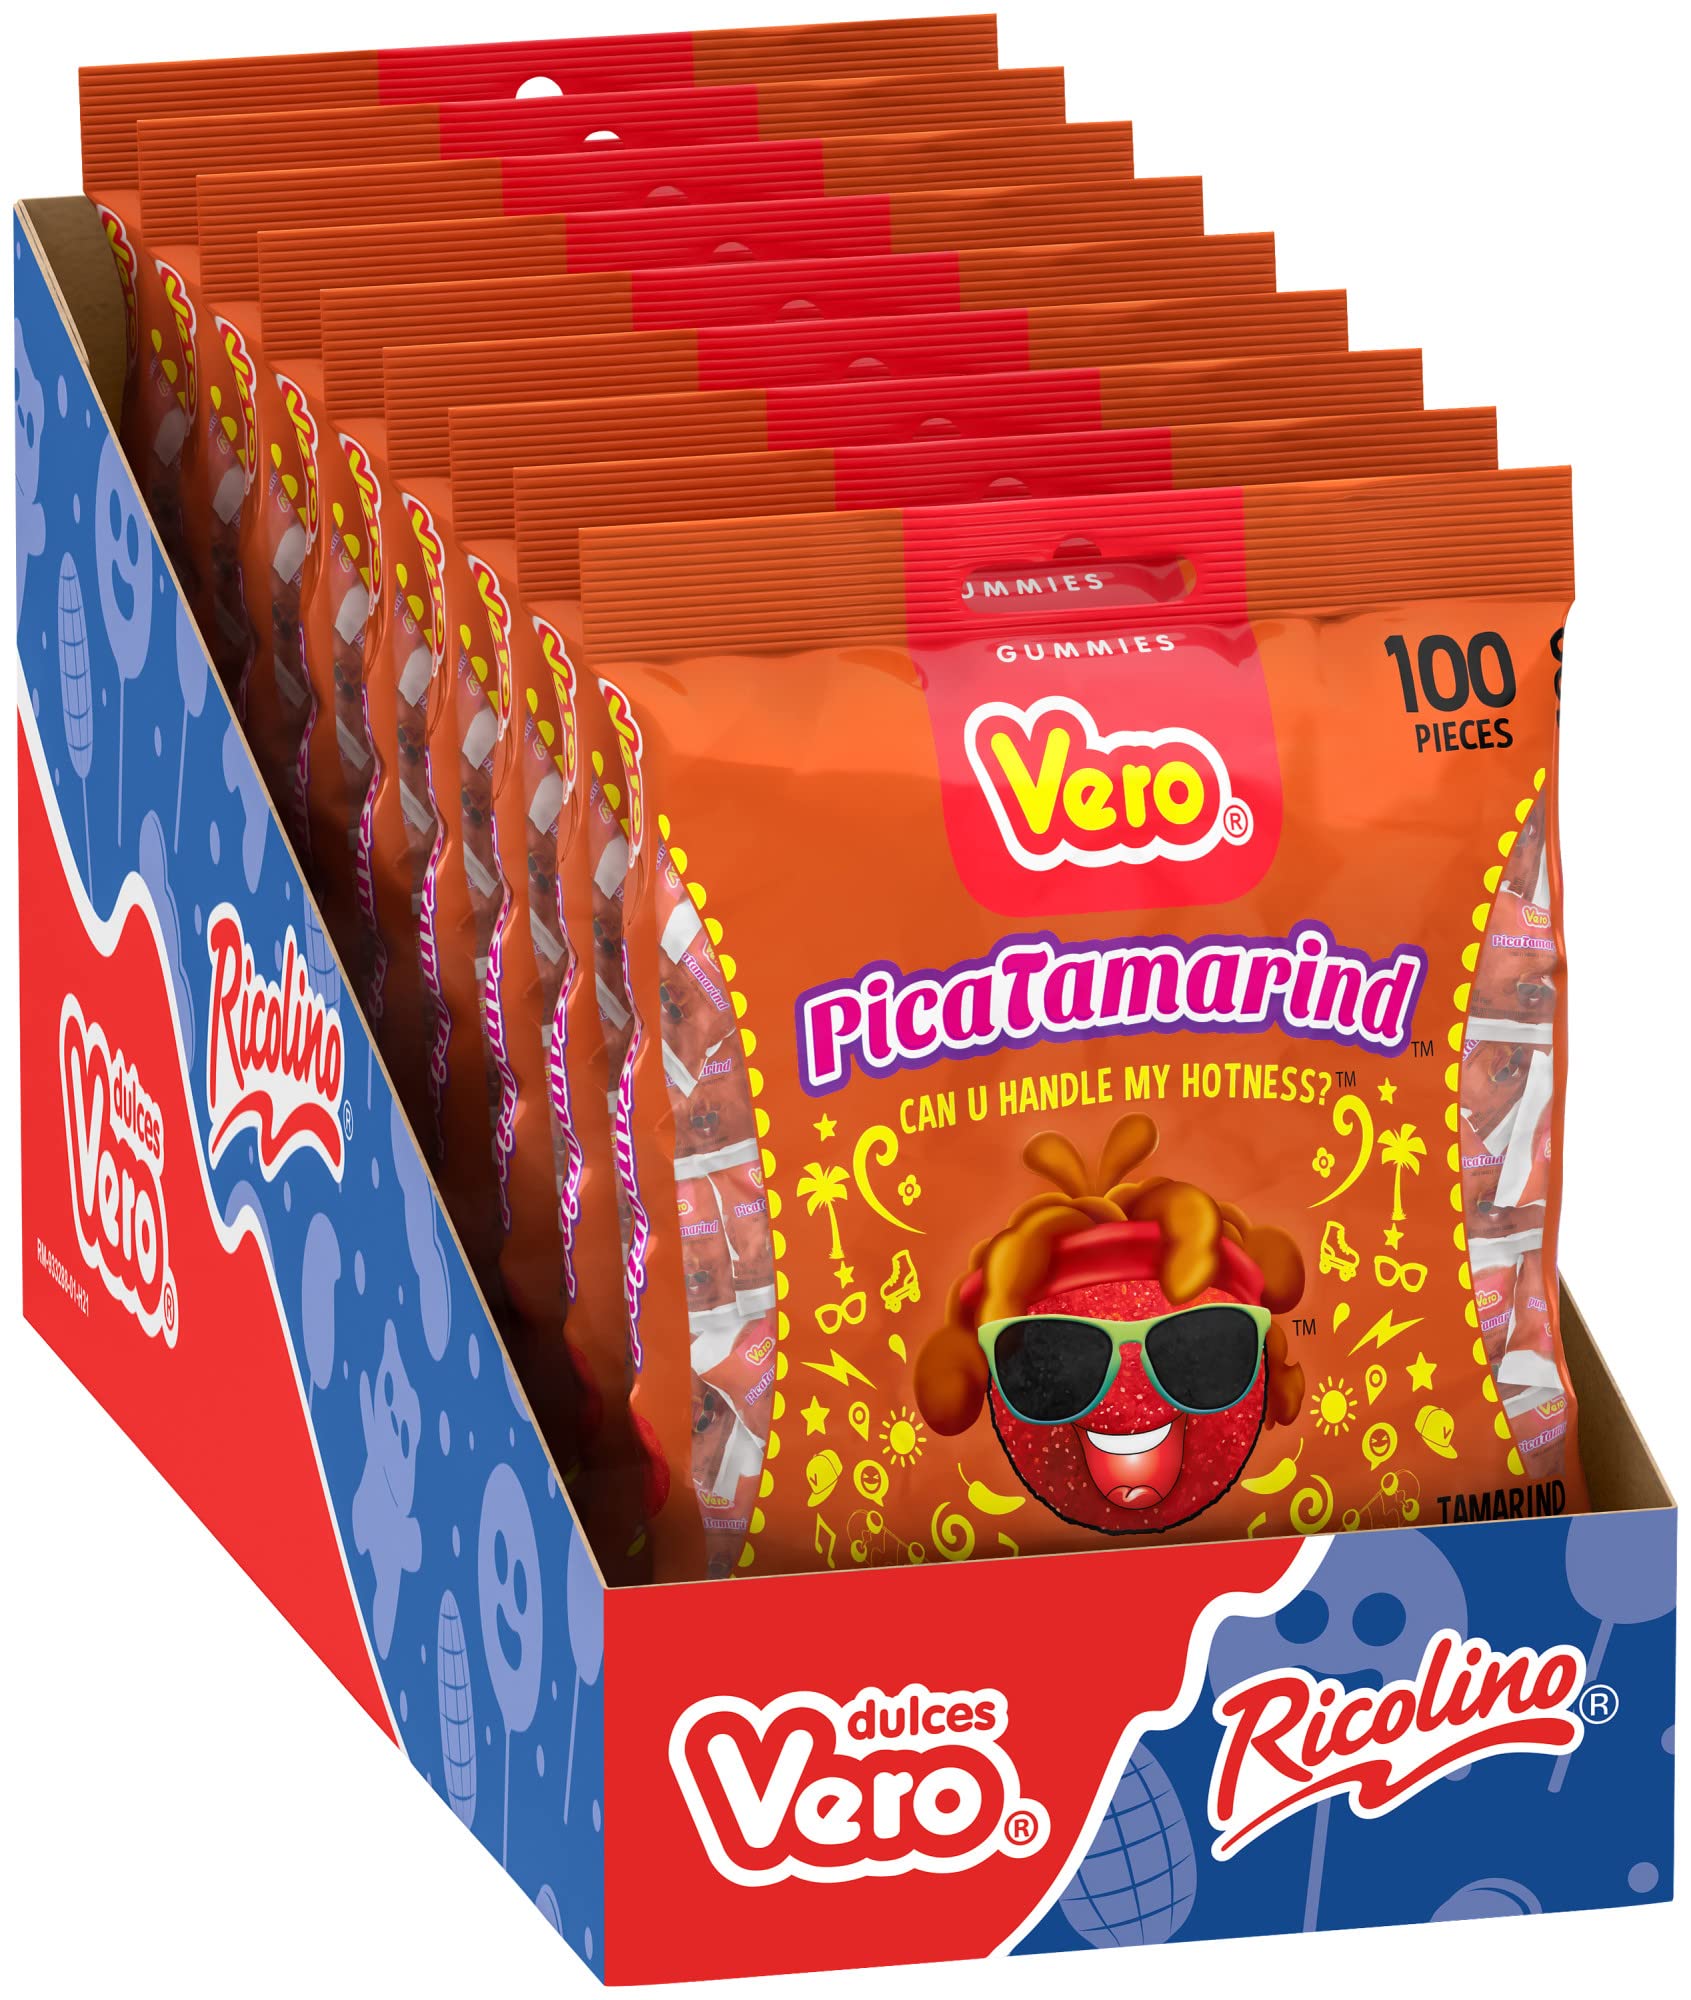 Vero PicaTamarind Tamarind Artificially Flavored Gummy Coated with Chili and Sugar, 8 Bags, 100 Count Each, Net Weight of 10 Pounds 8 Ounces